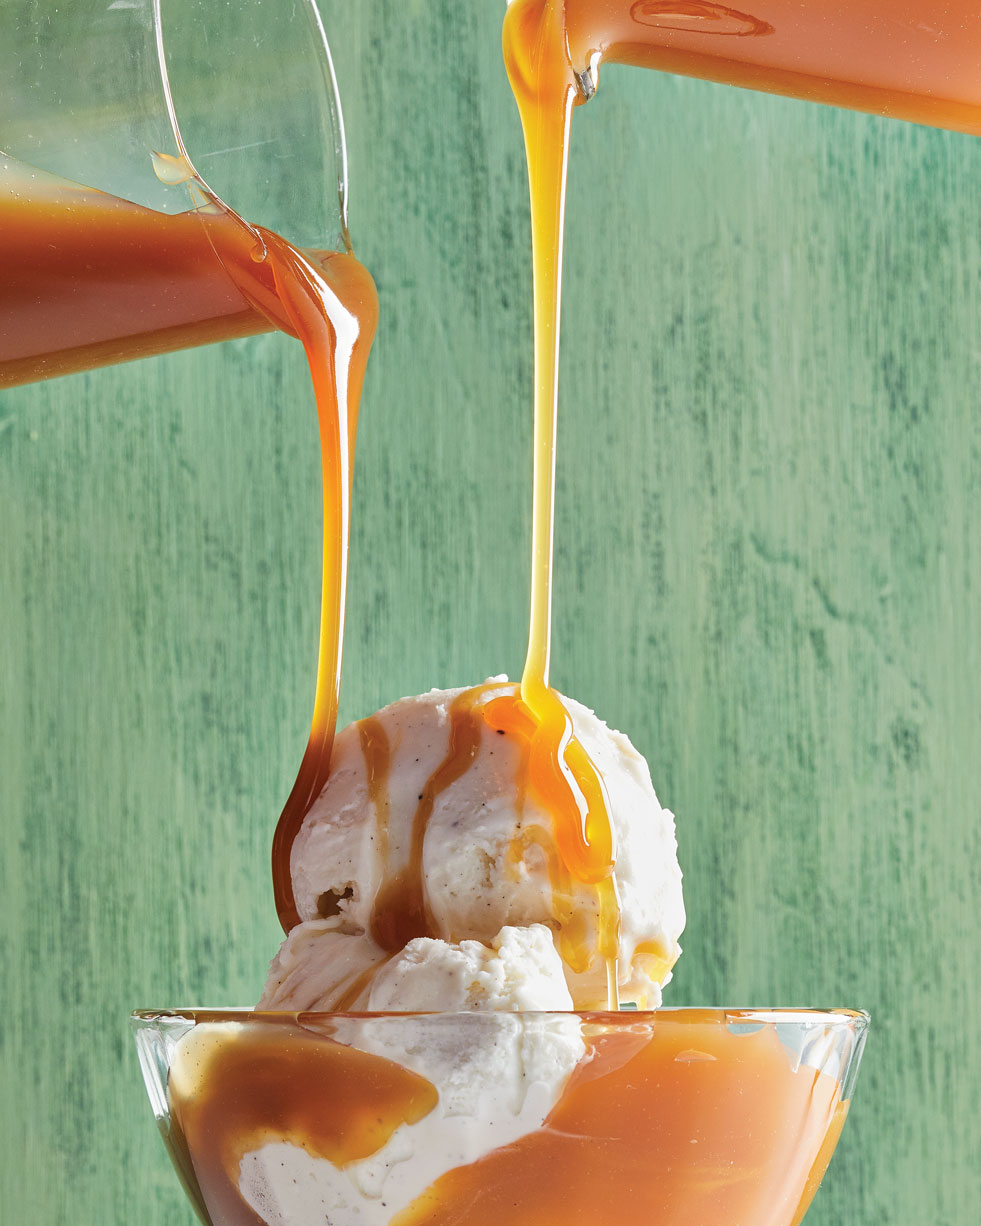 Caramel vs Butterscotch sauce : What’s the difference
between caramel and
butterscotch sauce? They look and taste similar, but there are subtle differences.